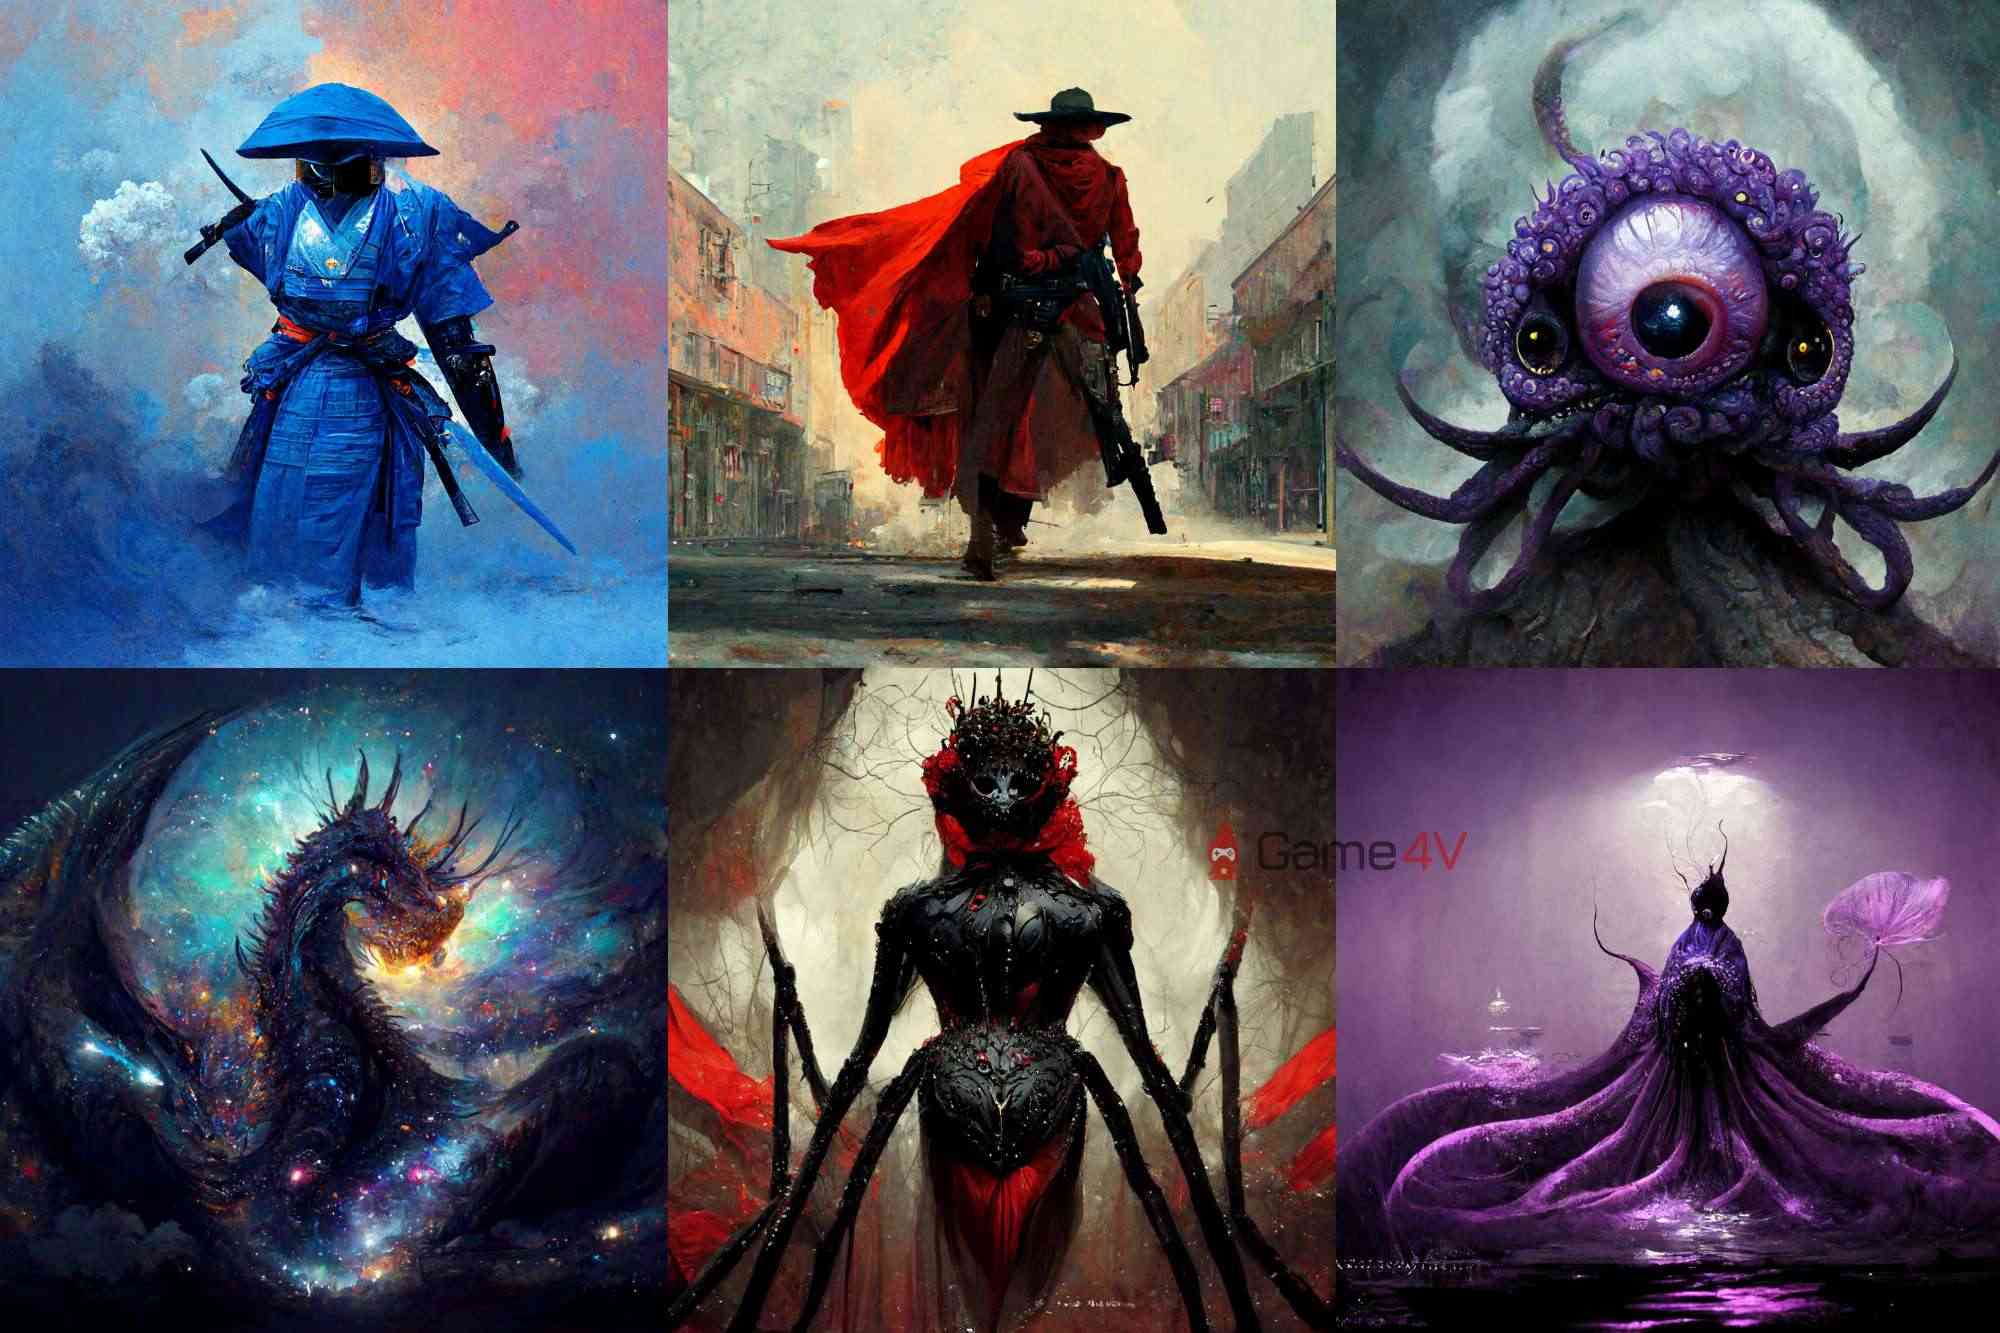 The champions in League of Legends are sketched with an extremely unique and diverse style.